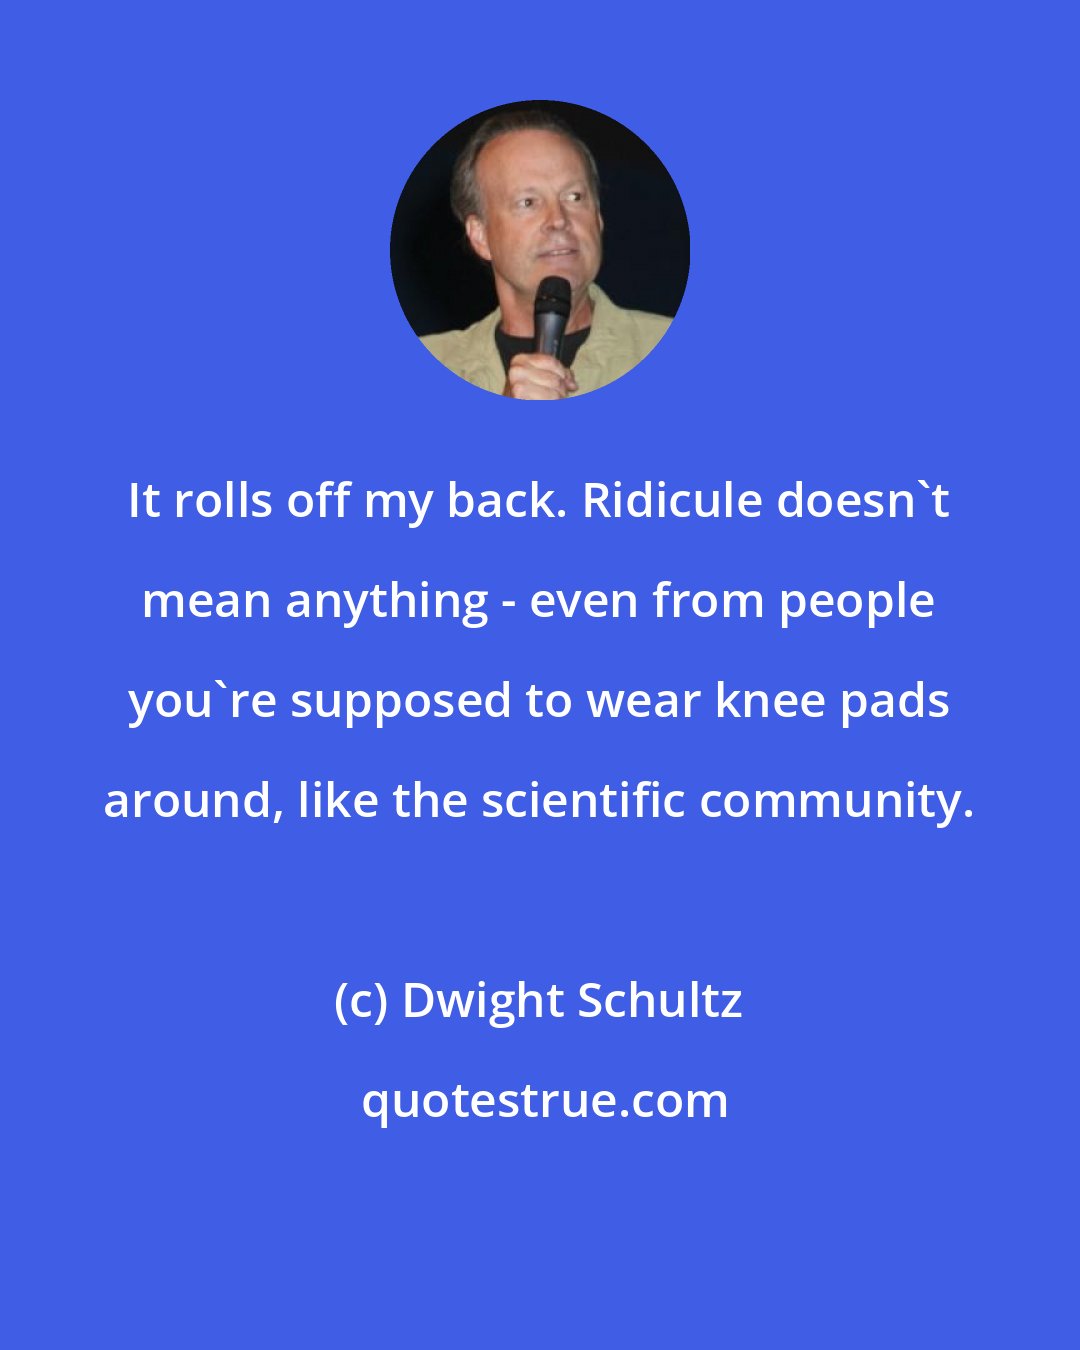 Dwight Schultz: It rolls off my back. Ridicule doesn't mean anything - even from people you're supposed to wear knee pads around, like the scientific community.